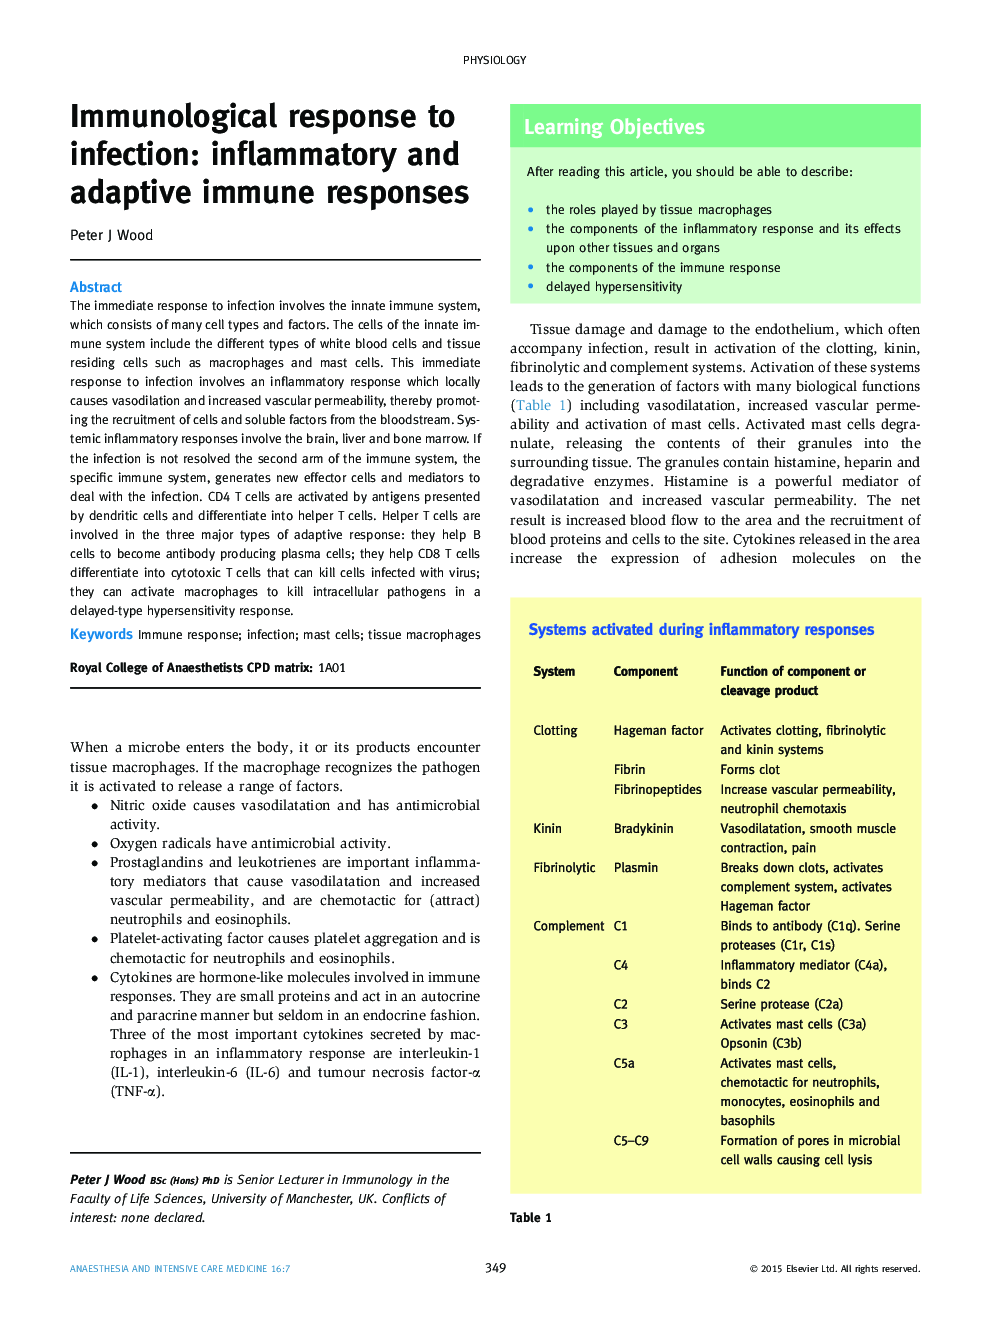 Immunological response to infection: inflammatory and adaptive immune responses